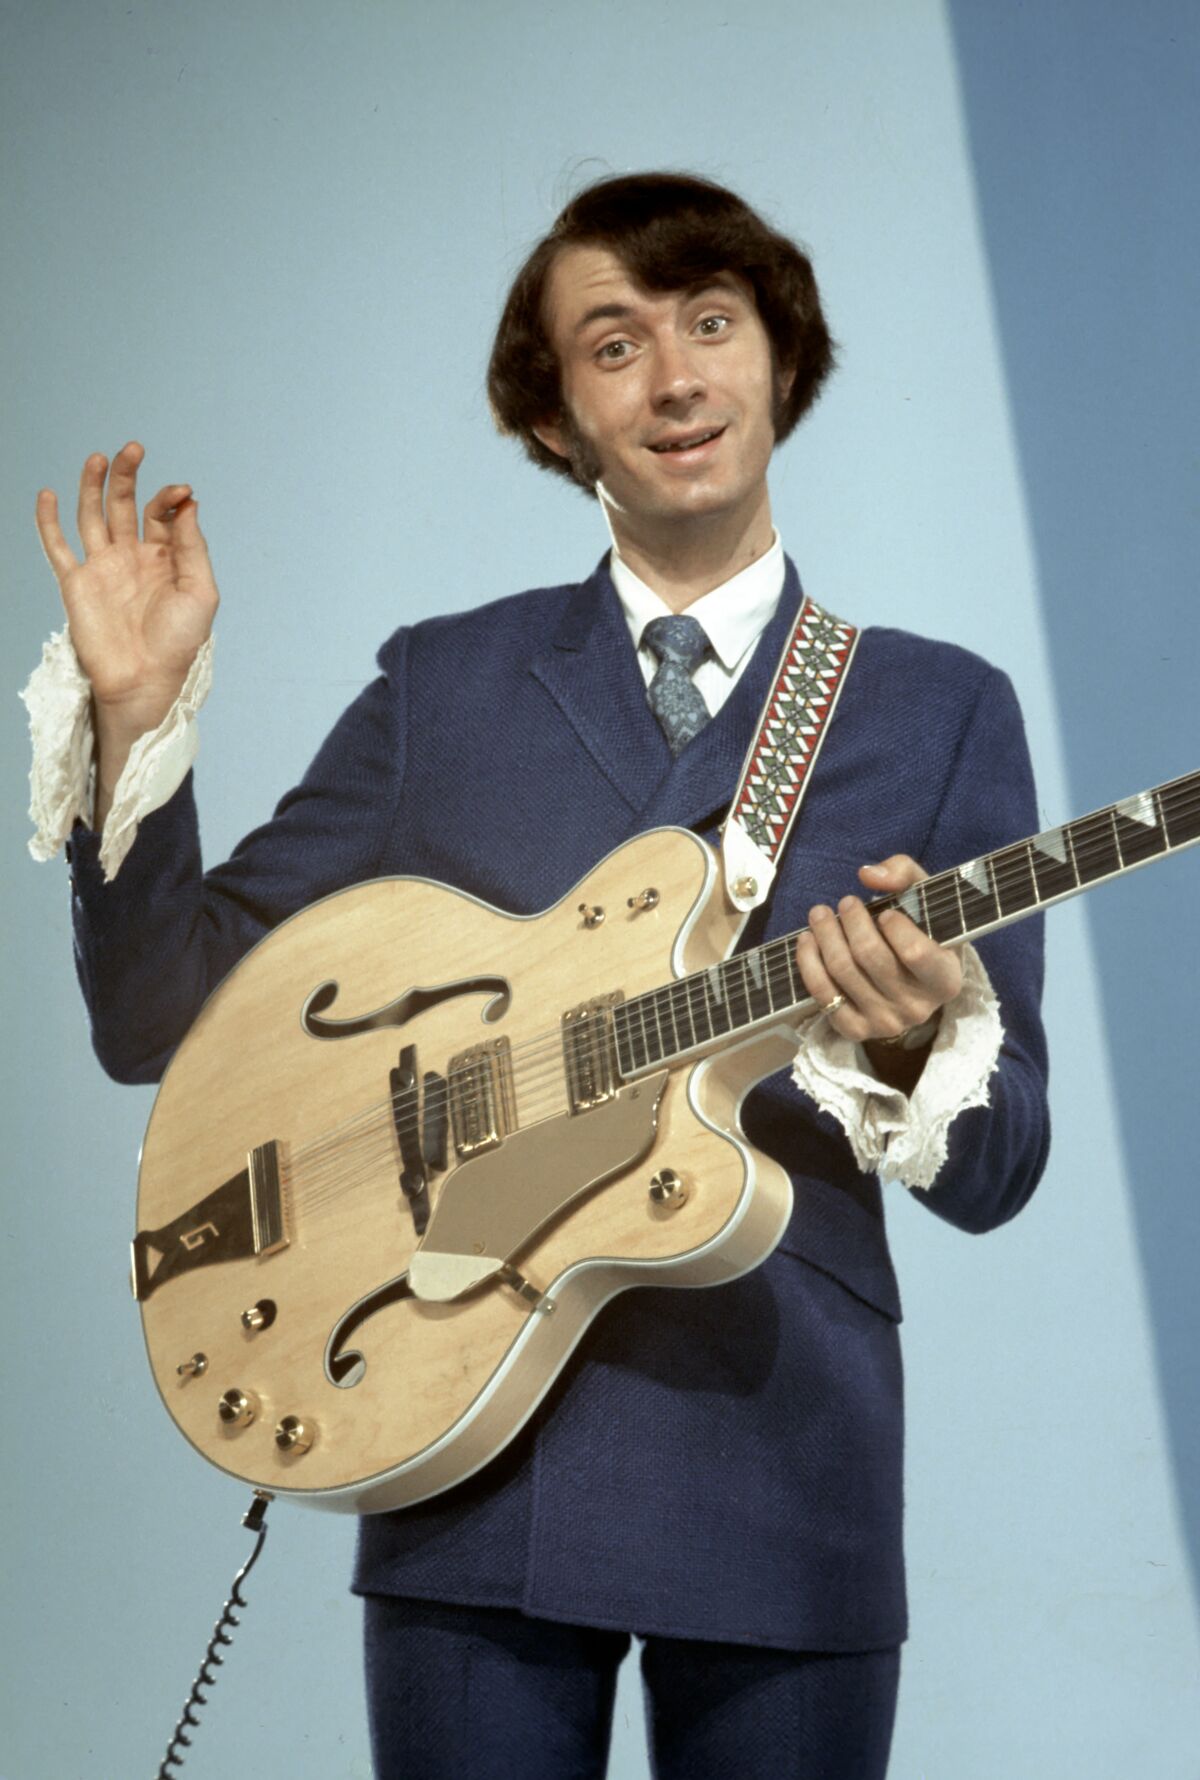 A man in a suit holding an electric guitar.